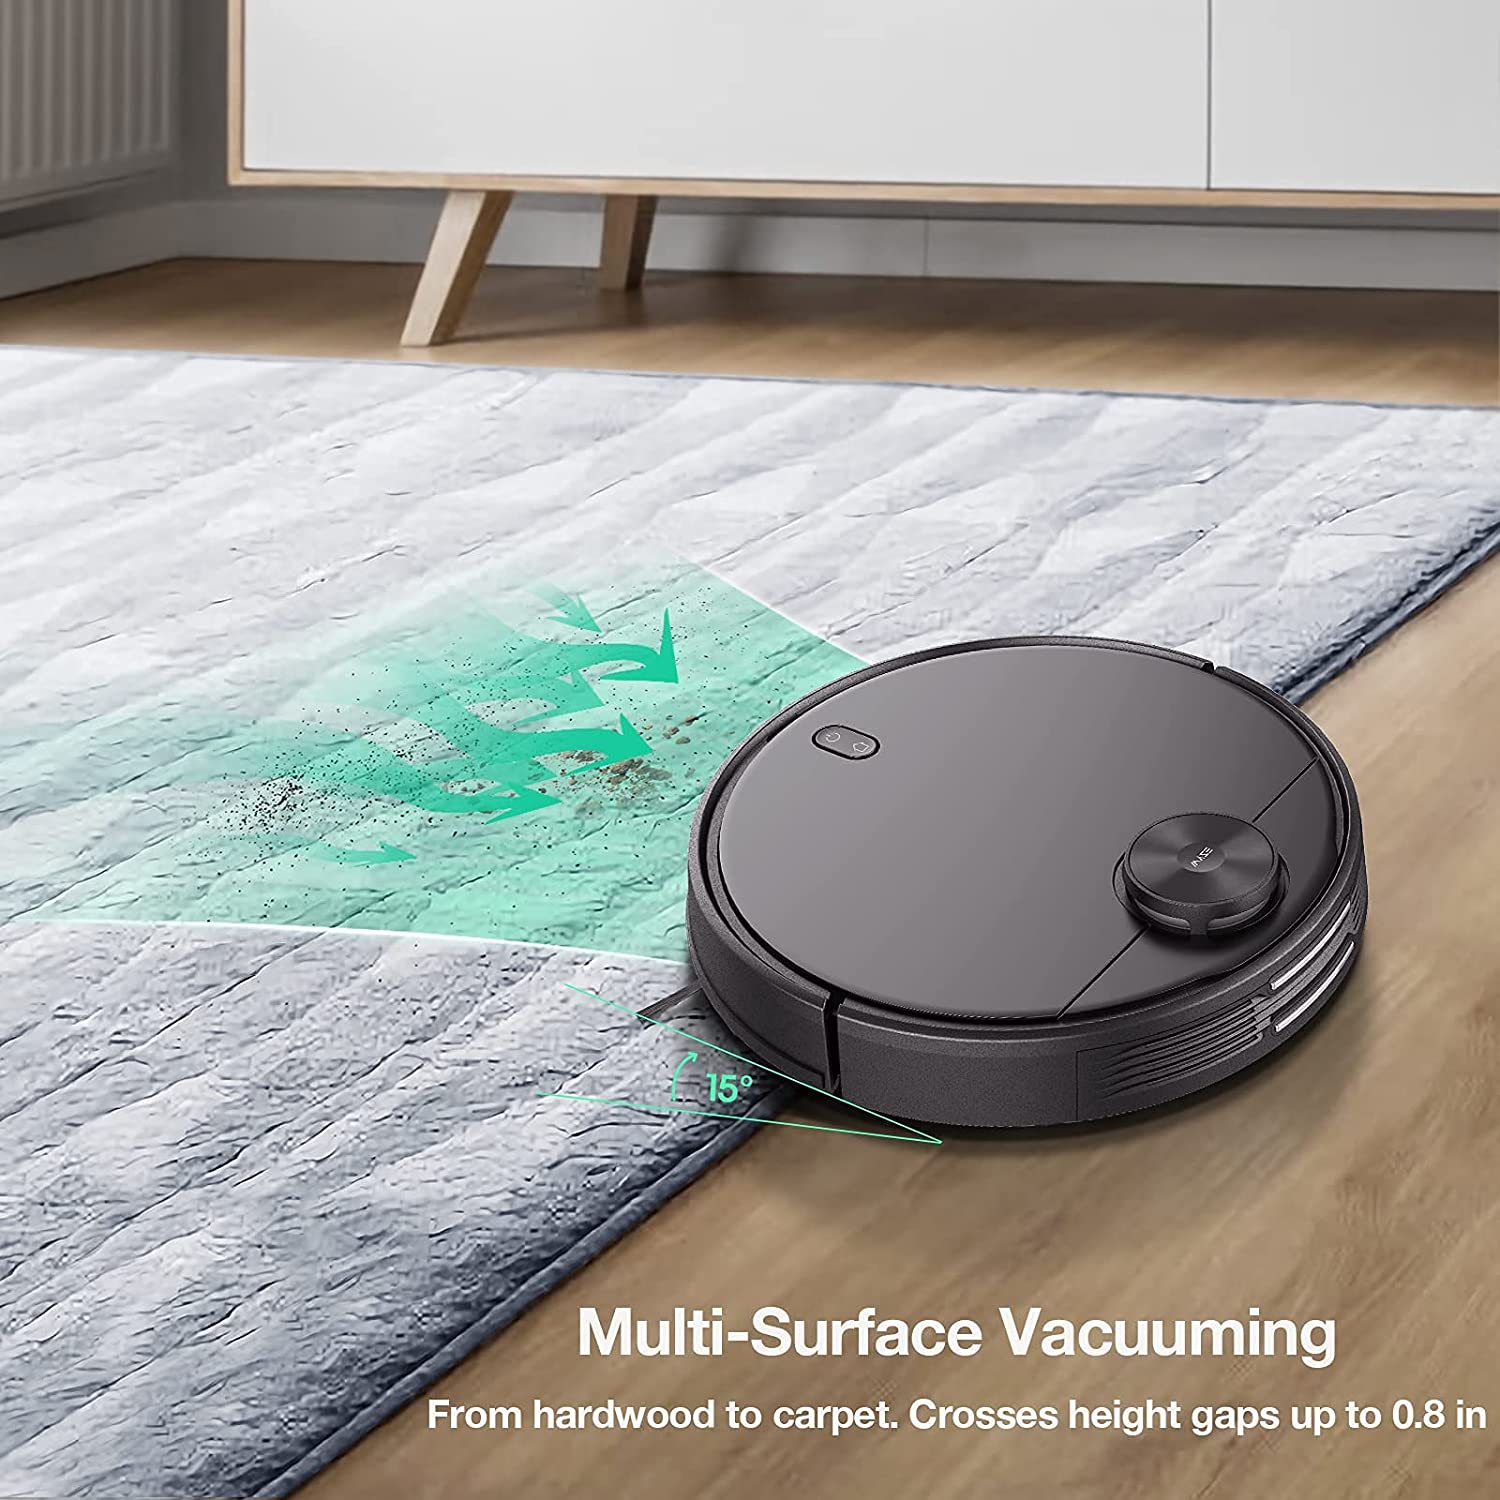 Are Third-Party Roomba Vacuum Filters Safe to Use?